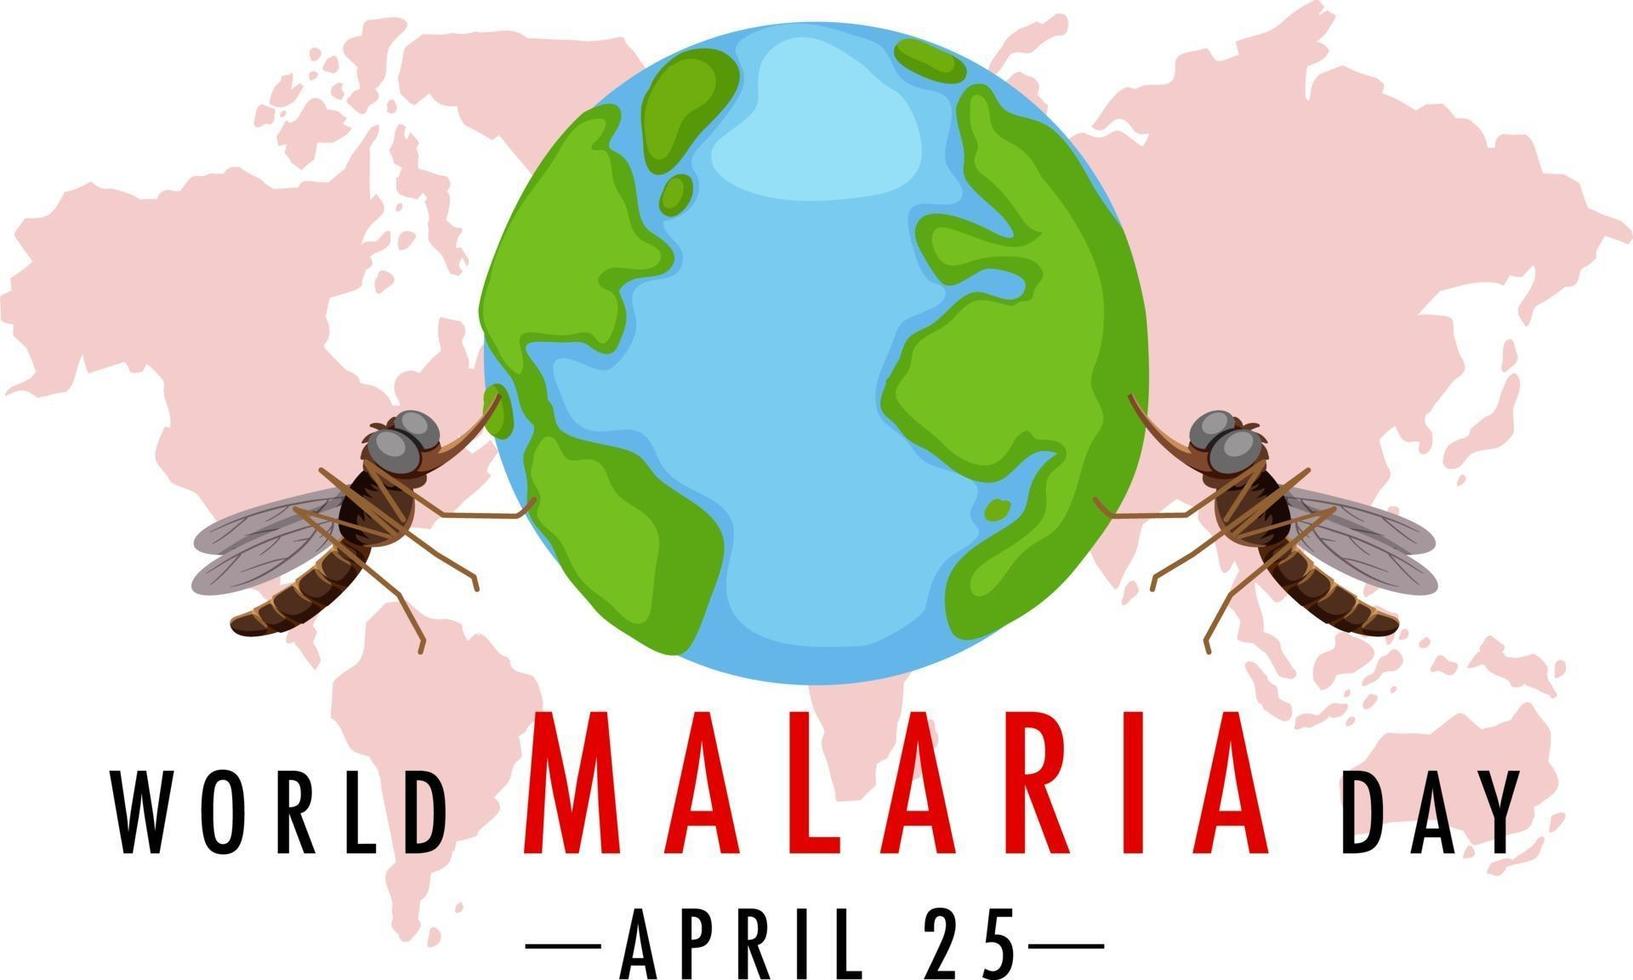 World Malaria Day logo or banner with mosquito on the earth sign vector